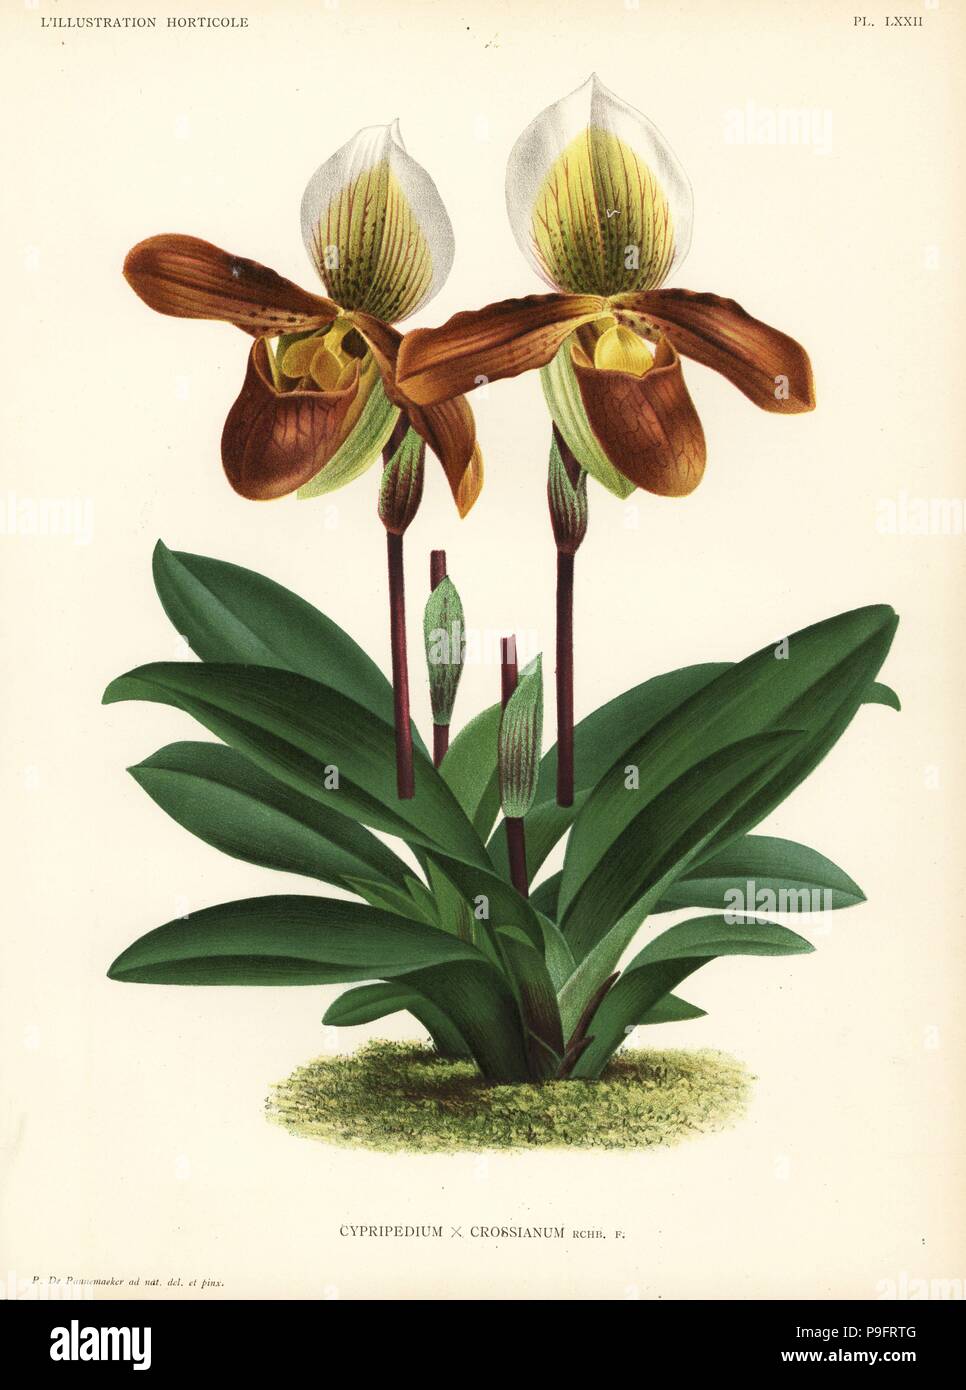 Cross's orchid, Paphiopedilum crossianum, hybrid of Paphiopedilum venustum x Paphiopedilum insigne. Drawn and chromolithographed by Pieter de Pannemaeker from Jean Linden's l'Illustration Horticole, Brussels, 1888. Stock Photo